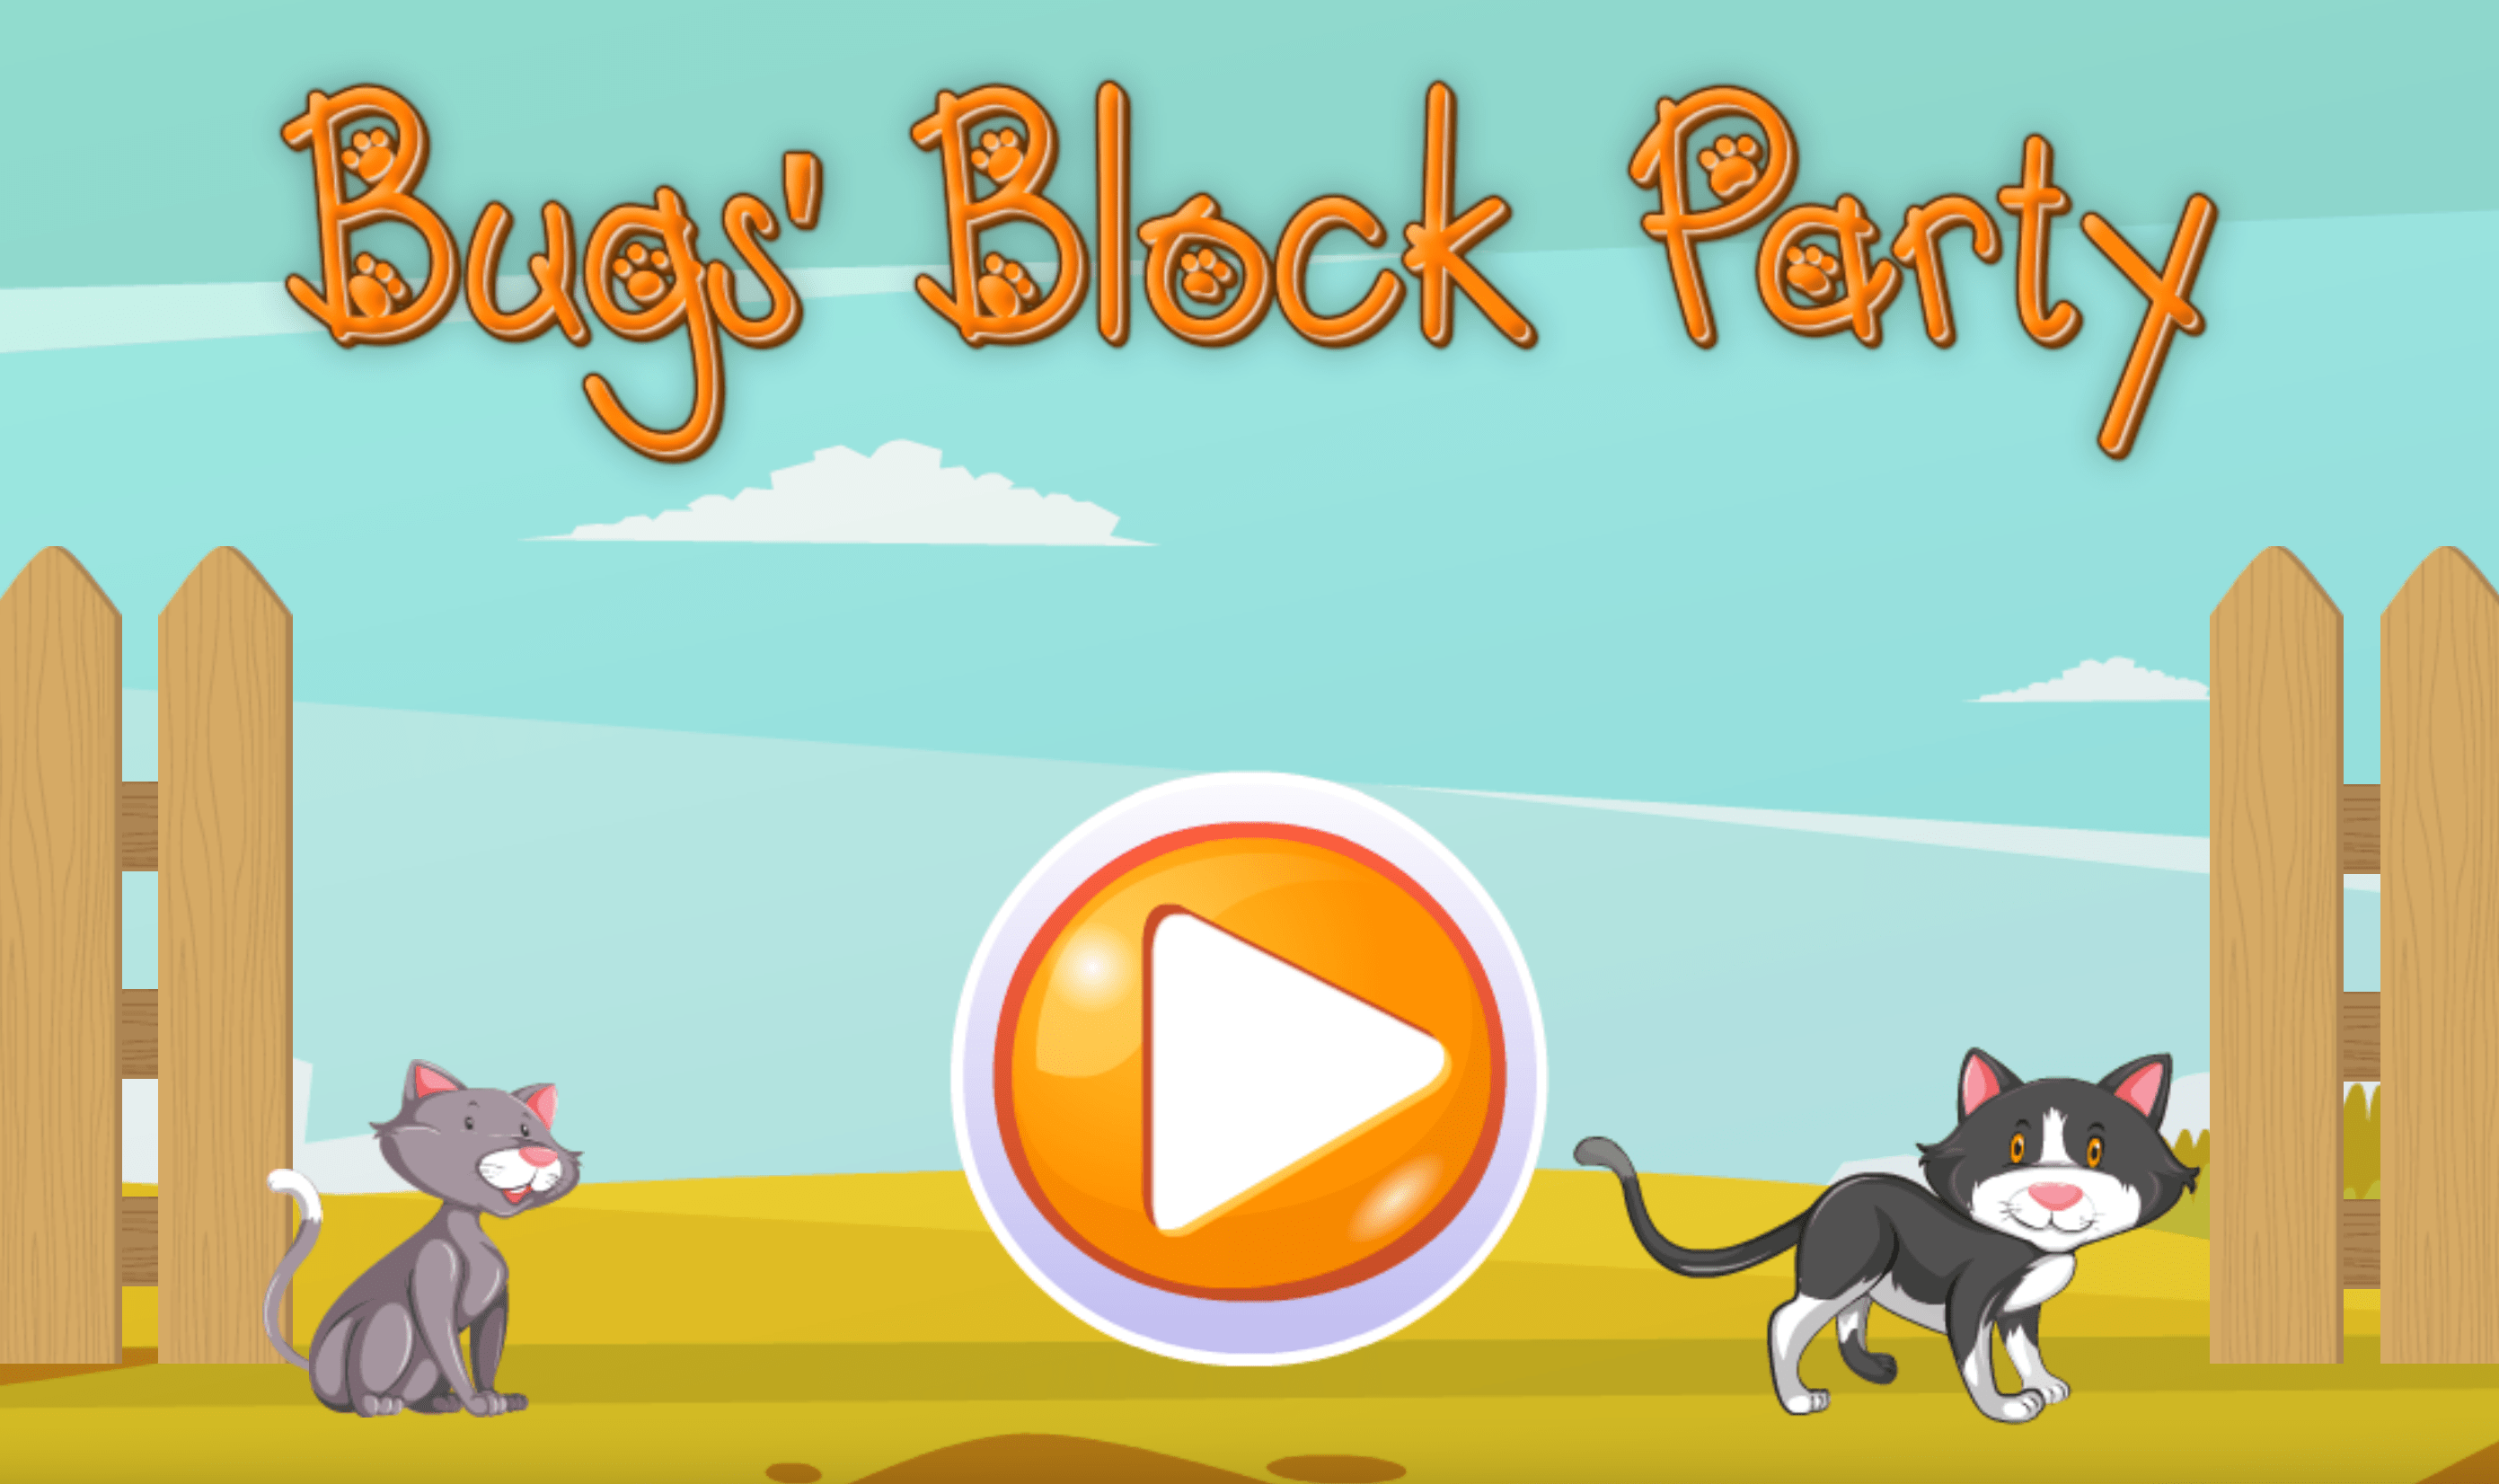 Bugs Block Party game